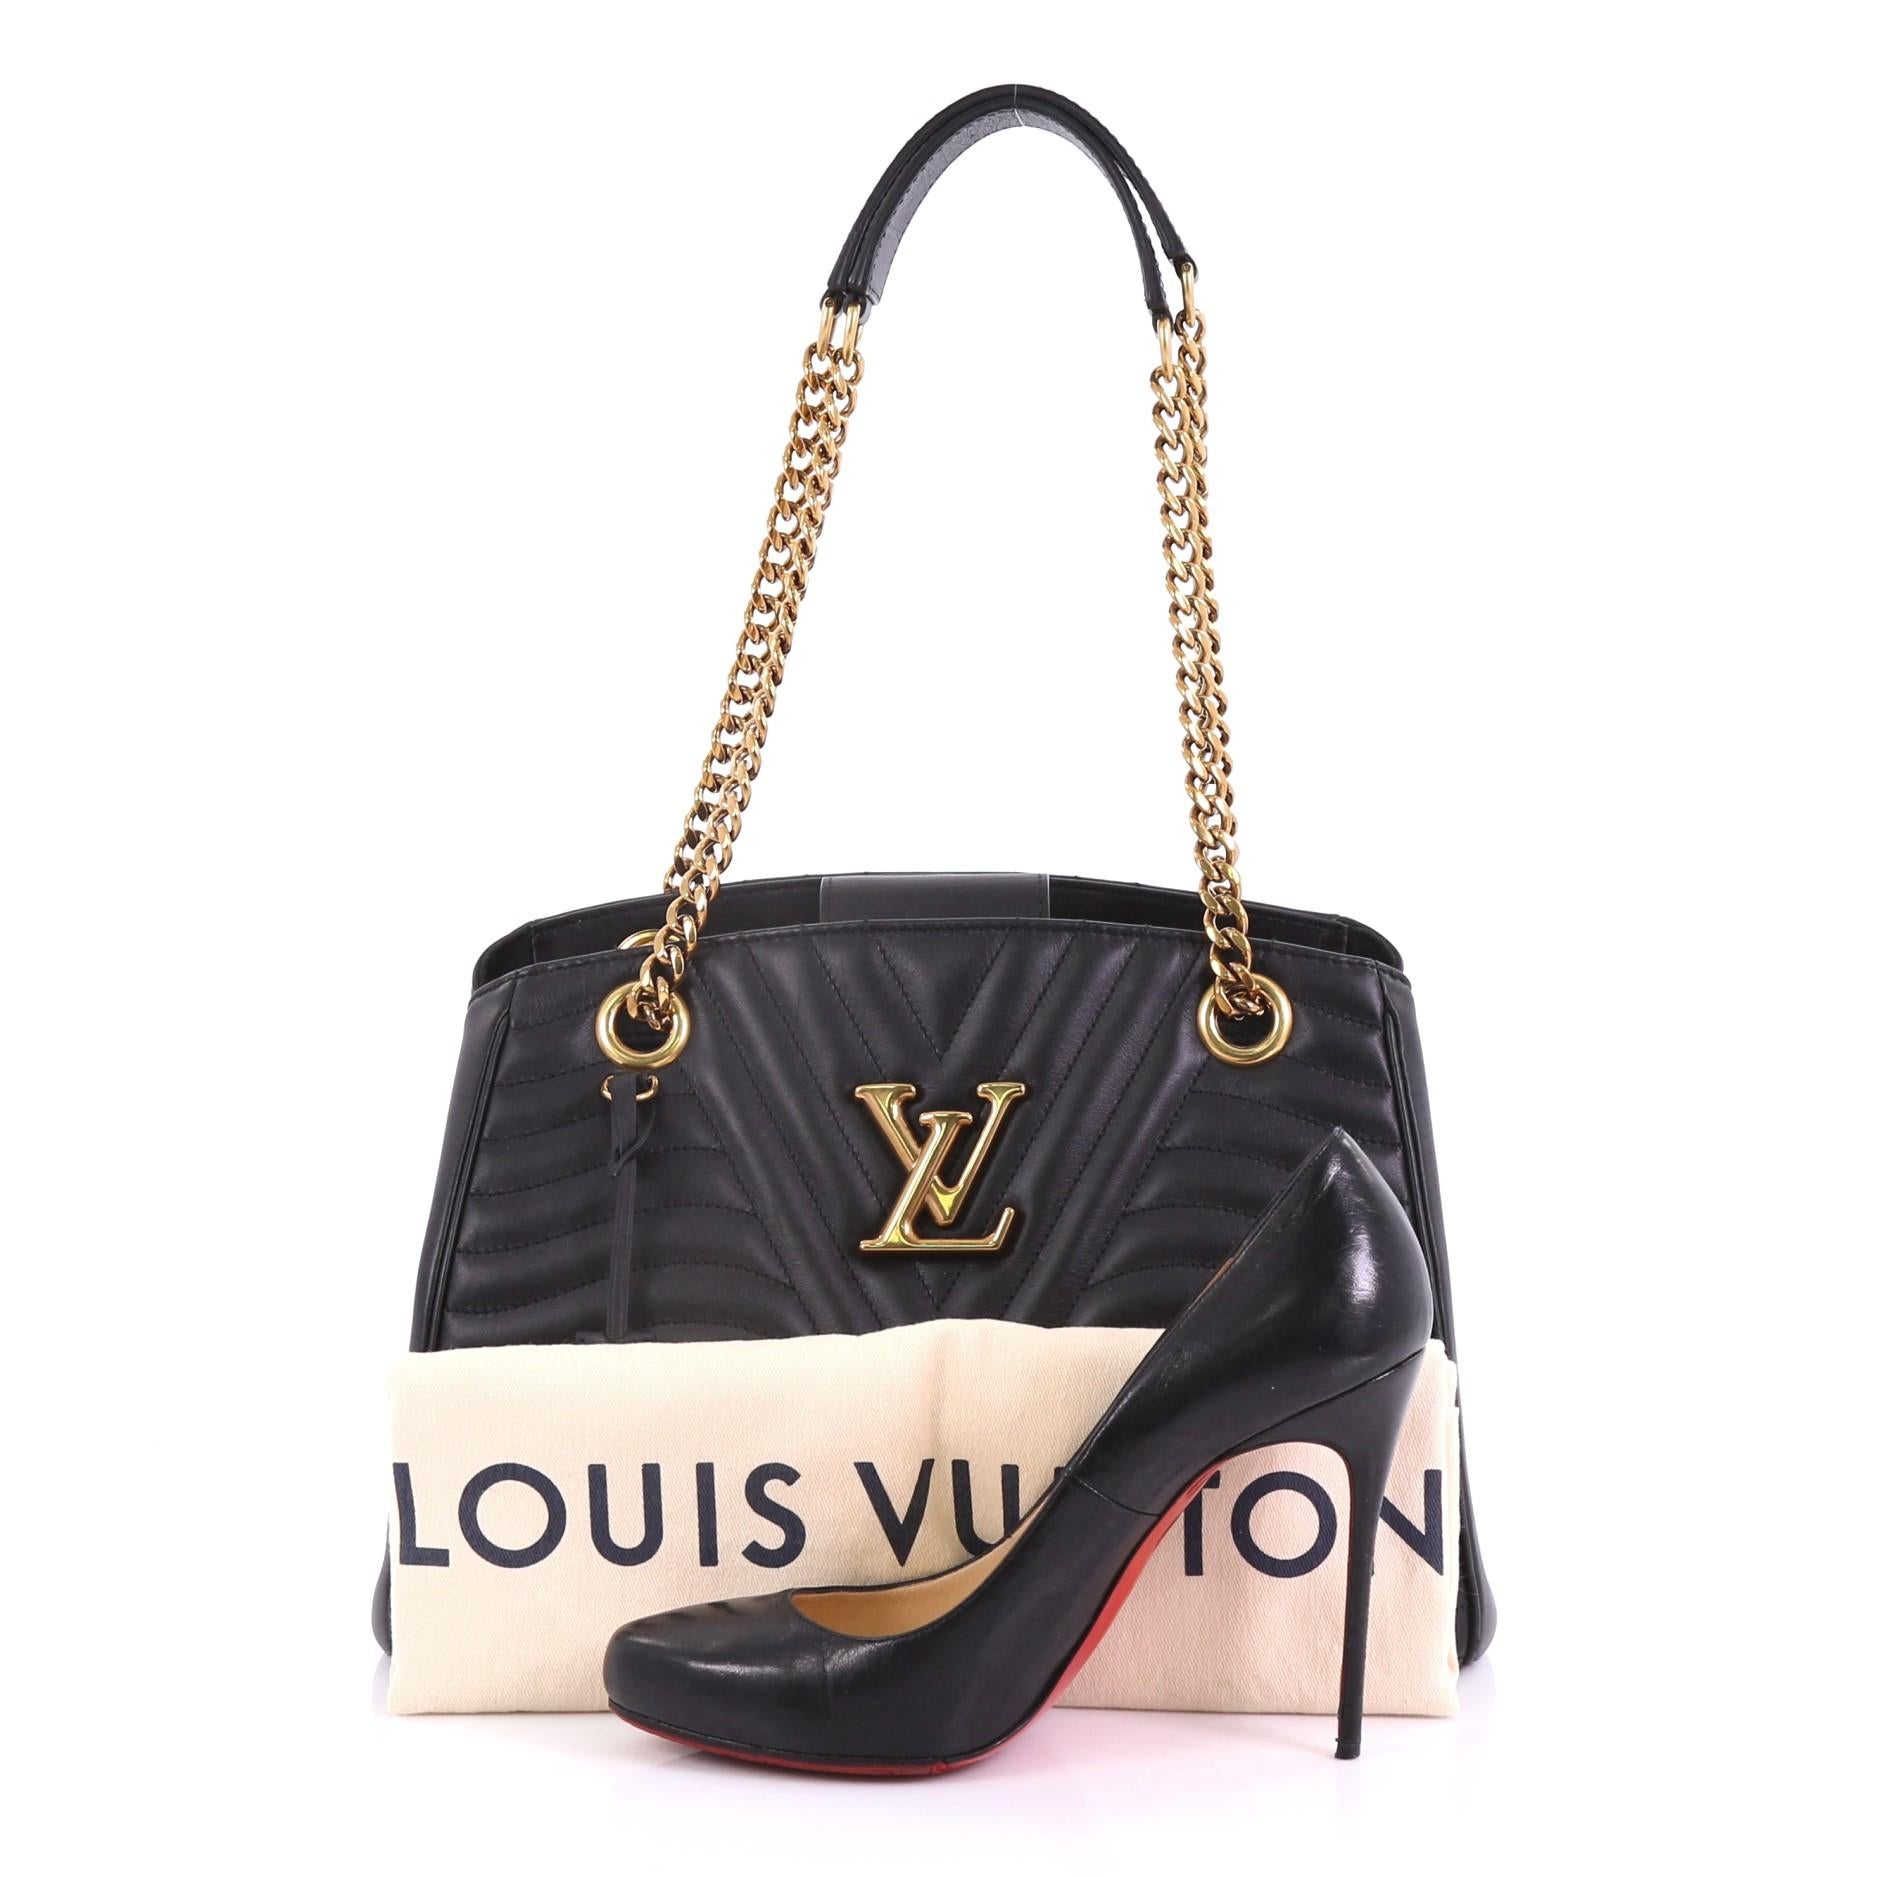 This Louis Vuitton New Wave Chain Tote Quilted Leather, crafted from black quilted leather, features chain-link strap with leather pads signed “Louis Vuitton” and gold-tone hardware. Its magnetic closure opens to a black microfiber interior divided